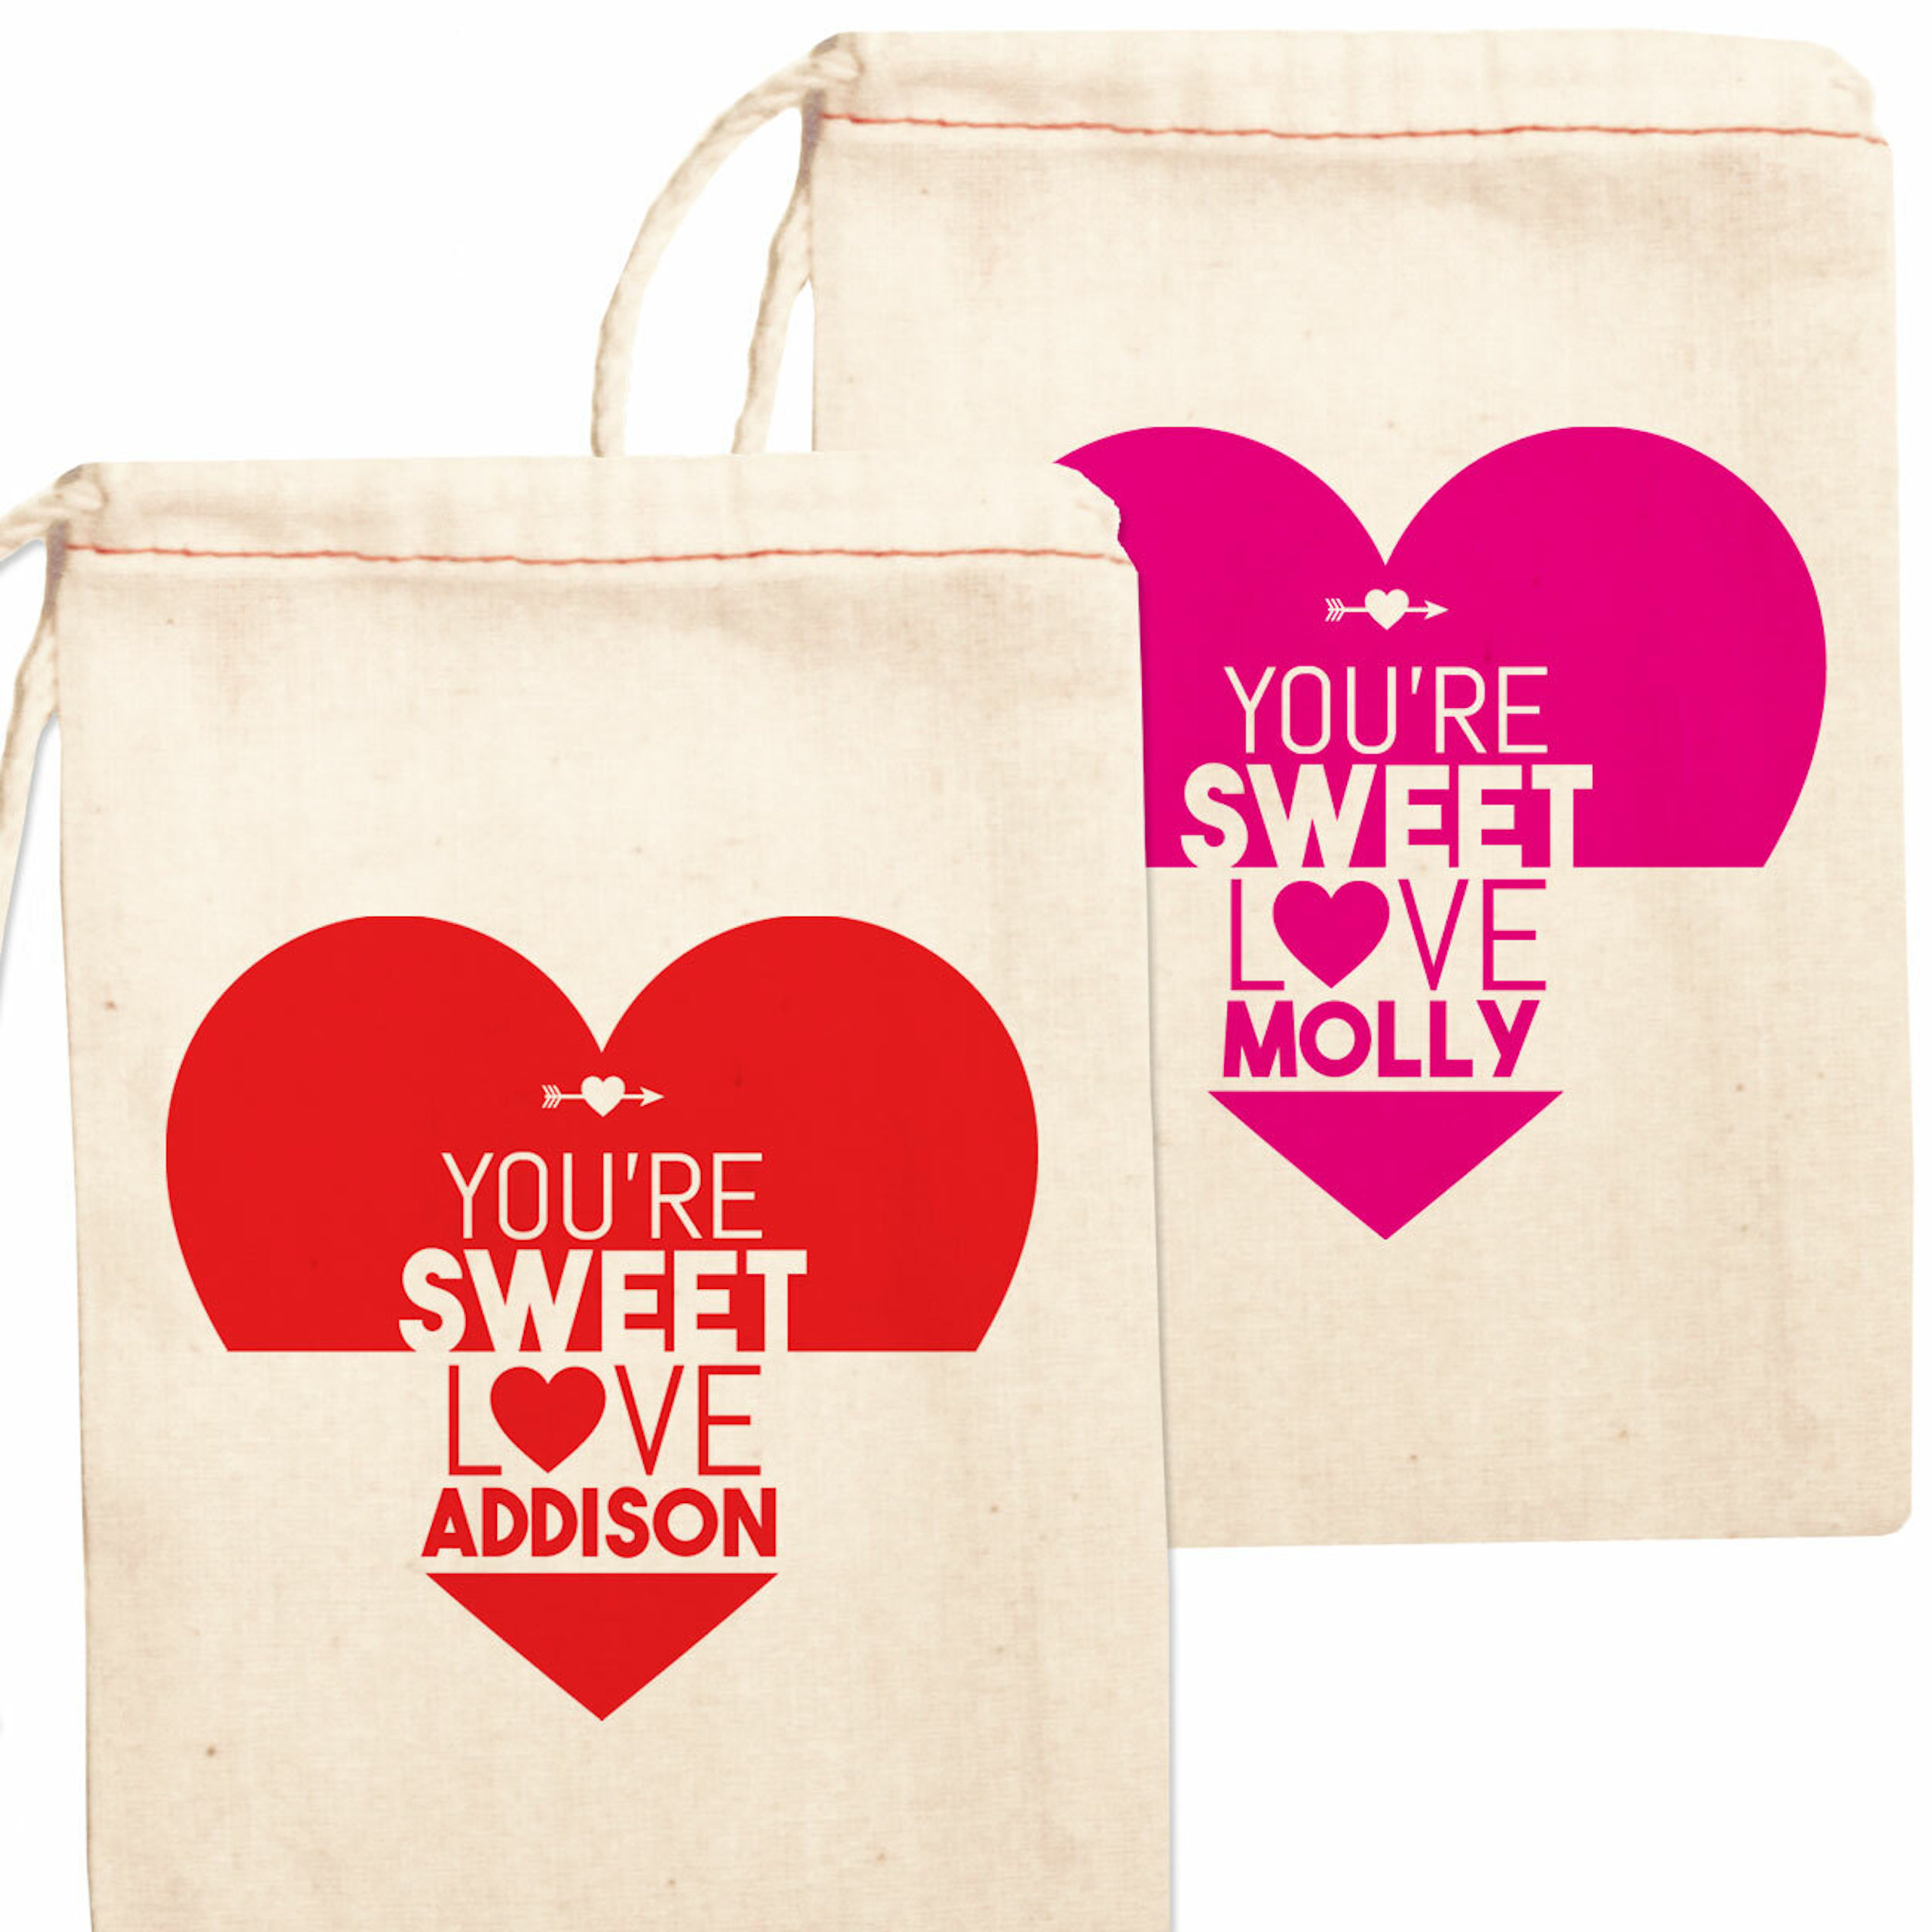 MOMENTUM BRAND* Valentines Day TREAT BAGS Party Gift/Favors NEW *YOU CHOOSE* 